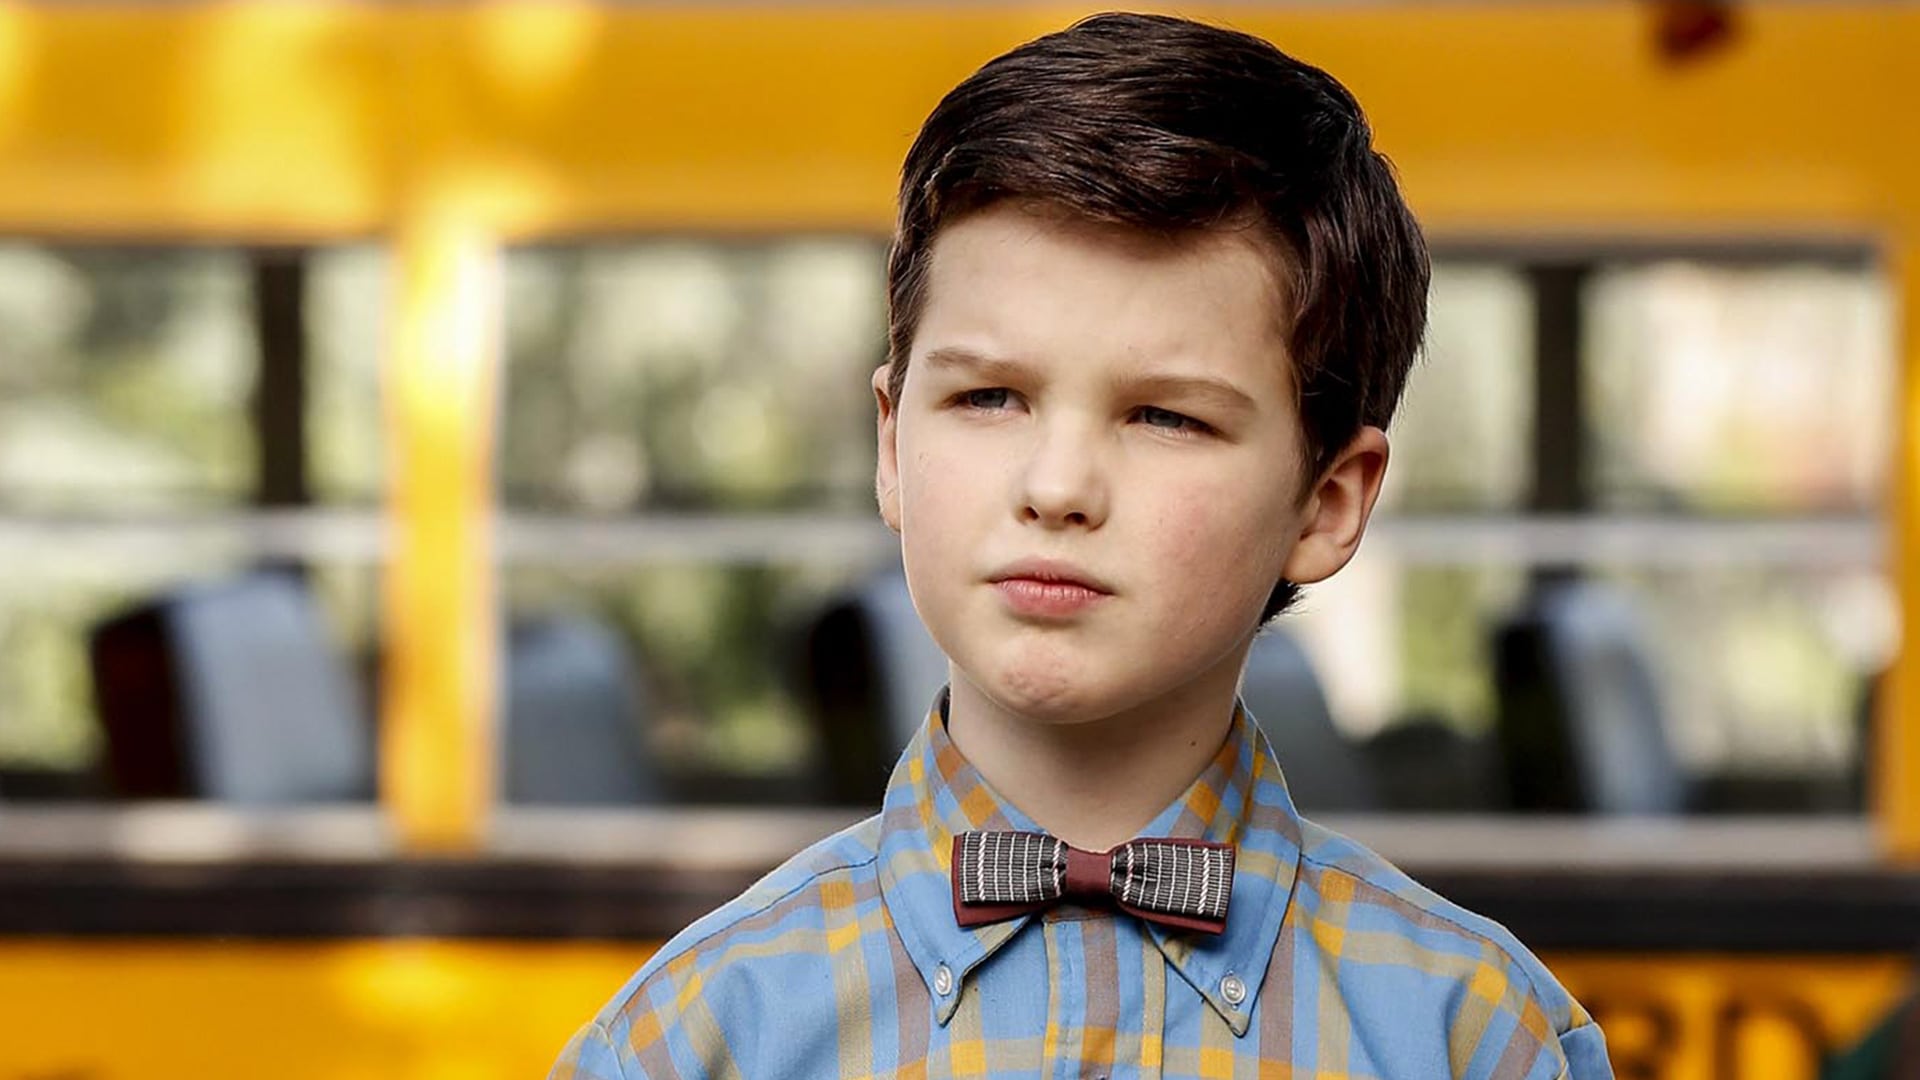 how old is from young sheldon